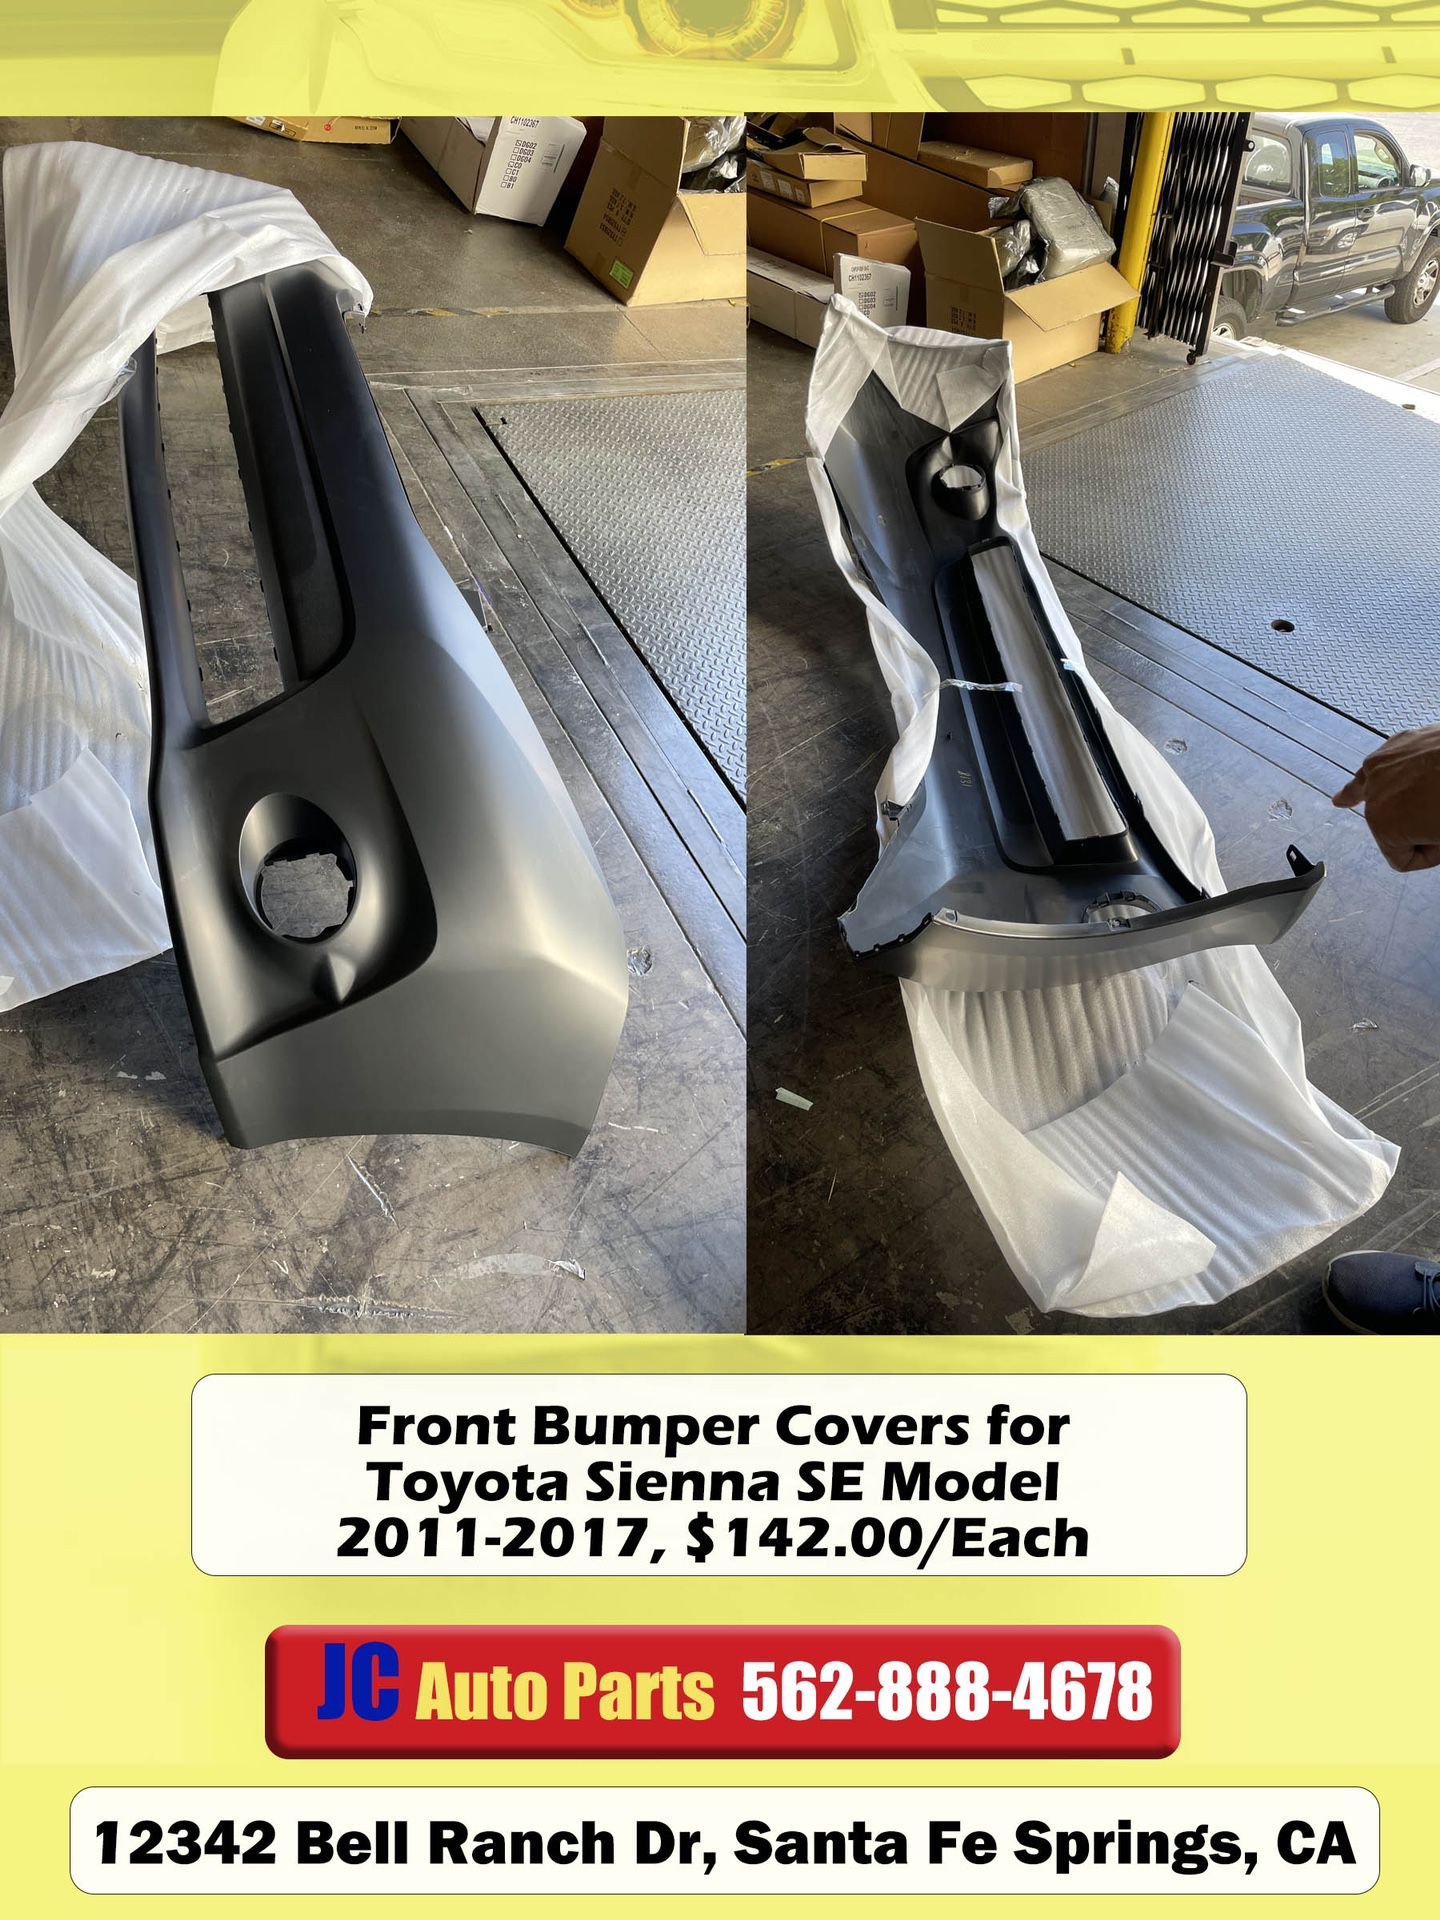 Front Bumper Covers for Toyota Sienna SE Model 2011 2012 2013 2014 2015 2016 2017